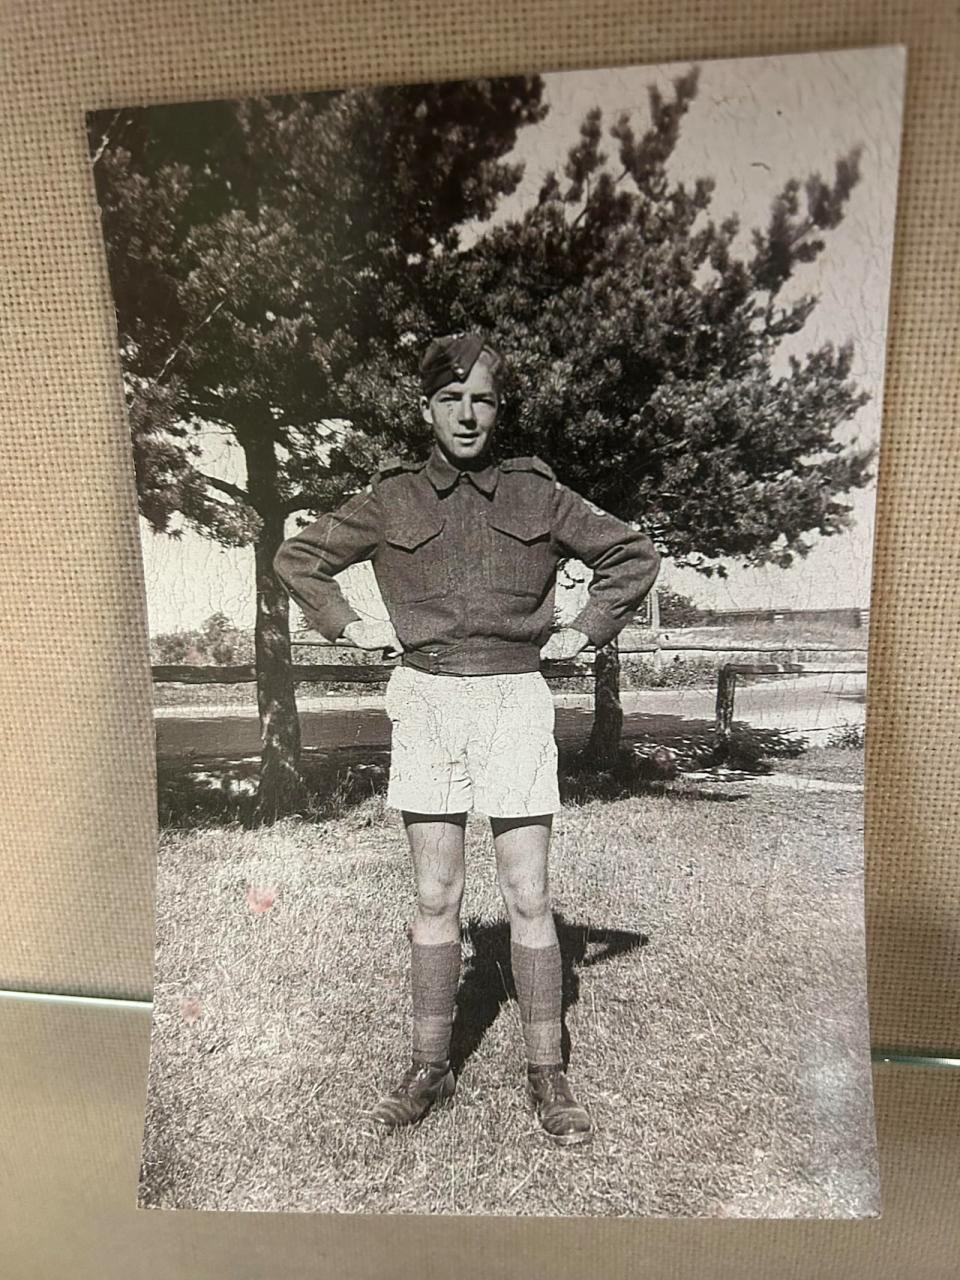 Armitage, 17, poses in shorts at what was then called Camp Petawawa in 1942, shortly after enlisting.